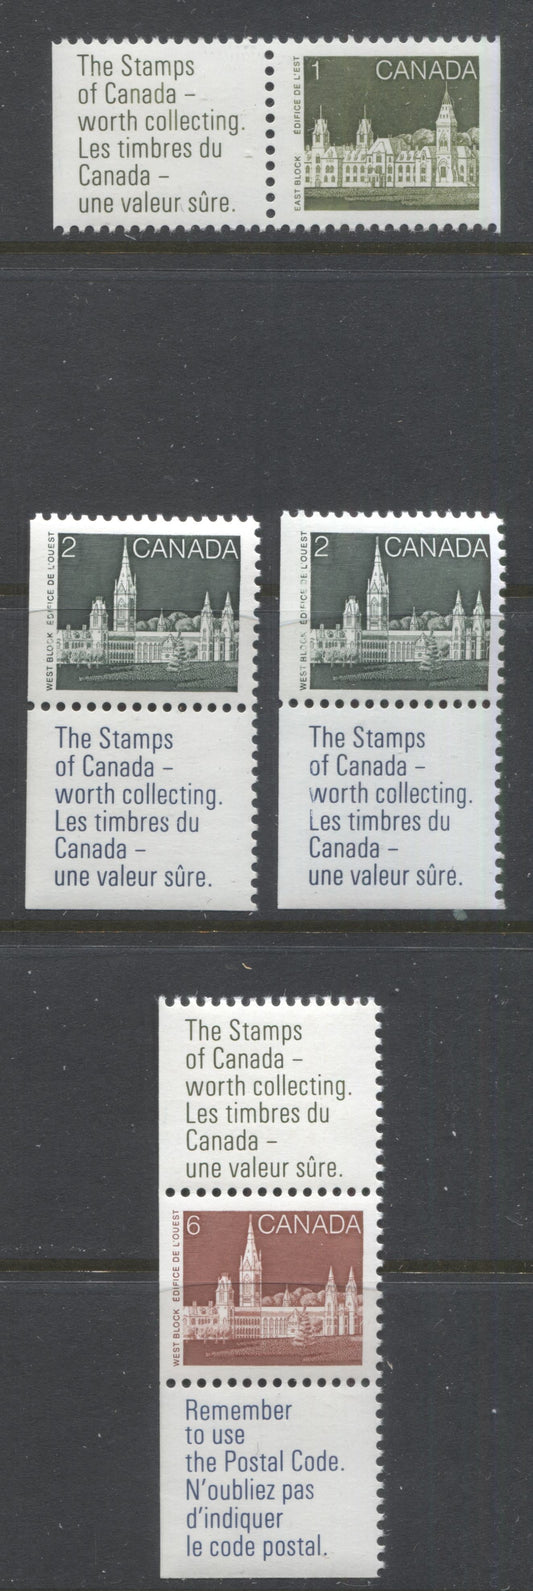 Lot 389 Canada #938i, 939a-ai, 942i 1c, 2c, 6c Sage Green, Slate Green & Deep Violet Parliament Buildings, 1982-1987 Artifacts & National Parks Issue, 4 VFNH Stamp-Label Pairs and Strips, NF/NF to DF/LF , Harrison Papers